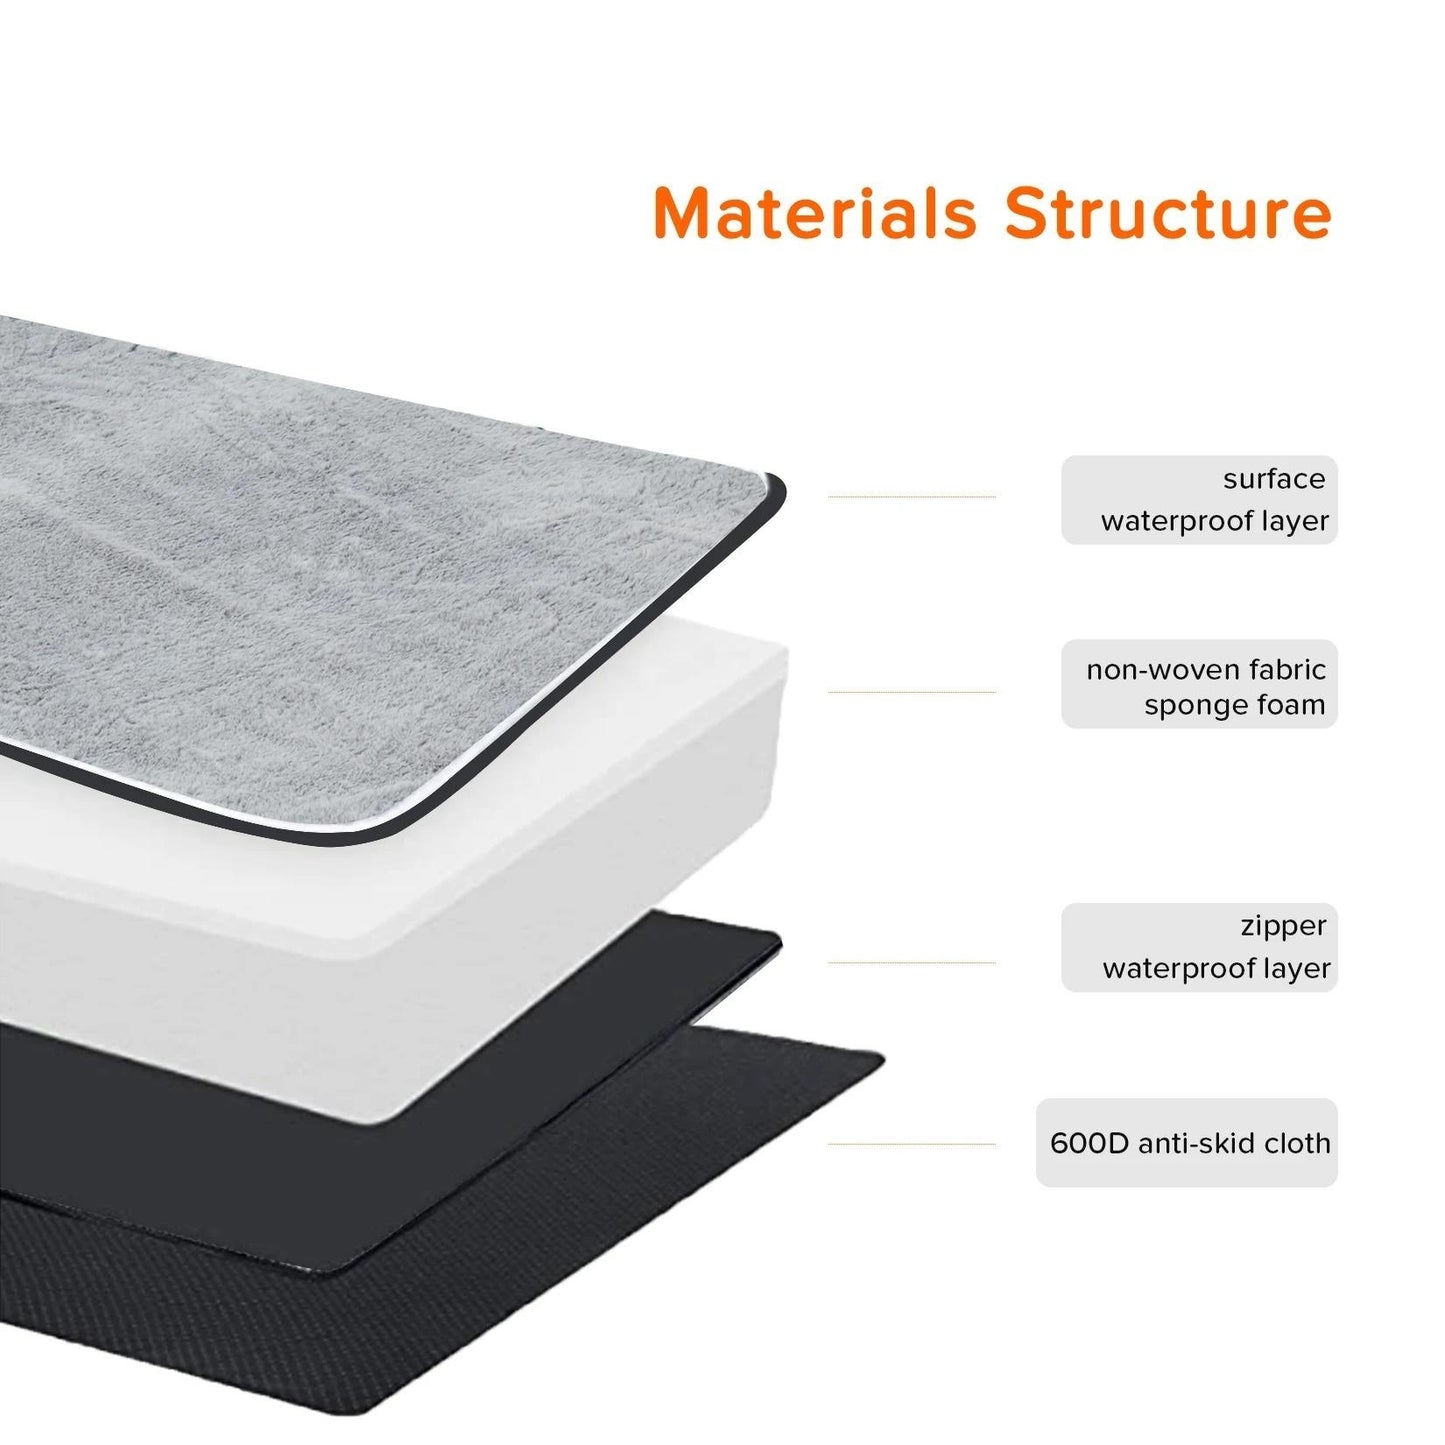 materials structure of orthopedic dog bed